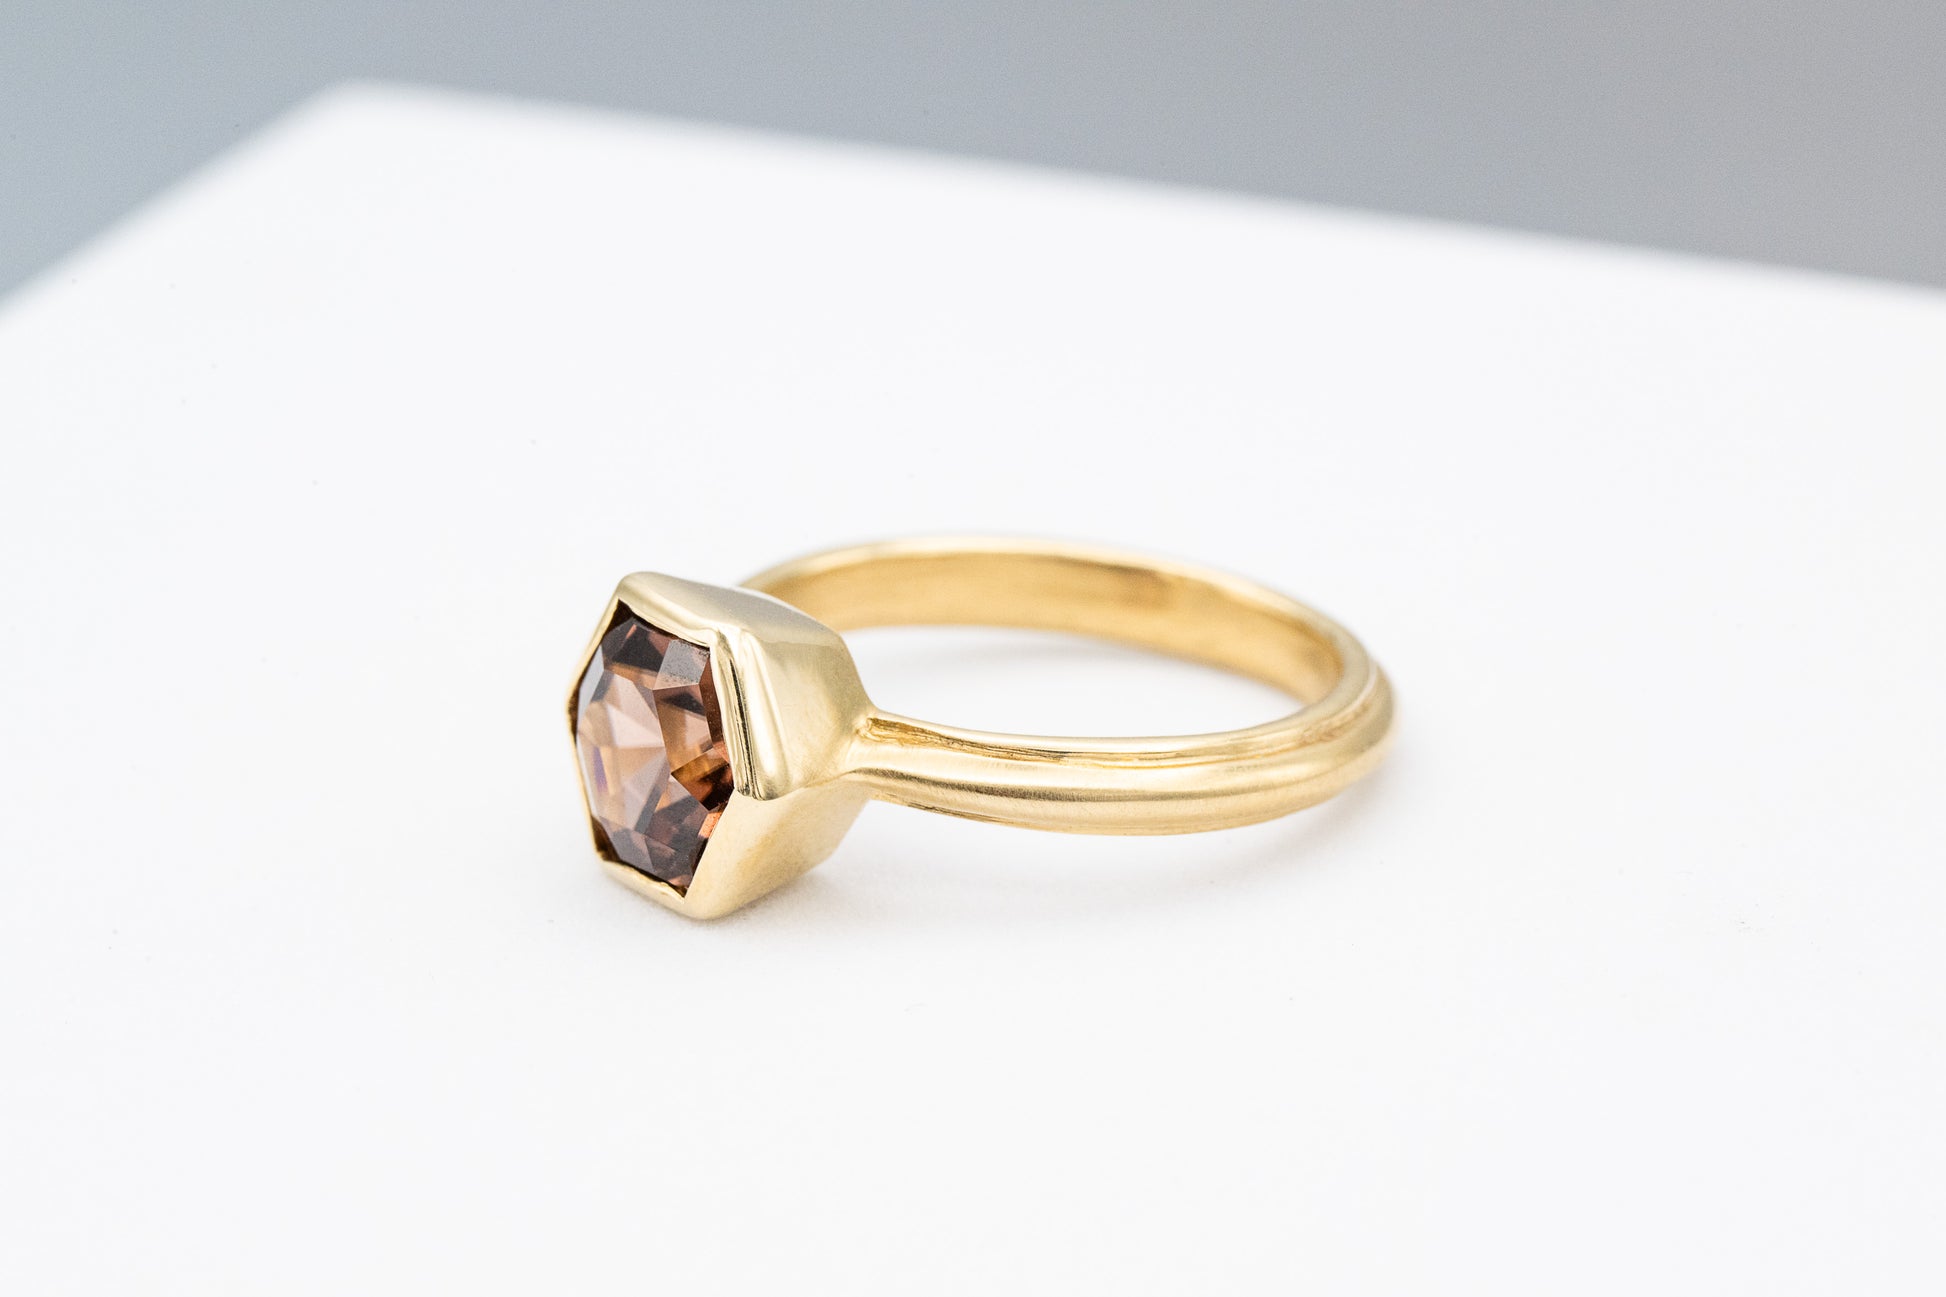 A handmade Tawny Champagne Yellow Gold Hexagon Ring with a smoky quartz stone.